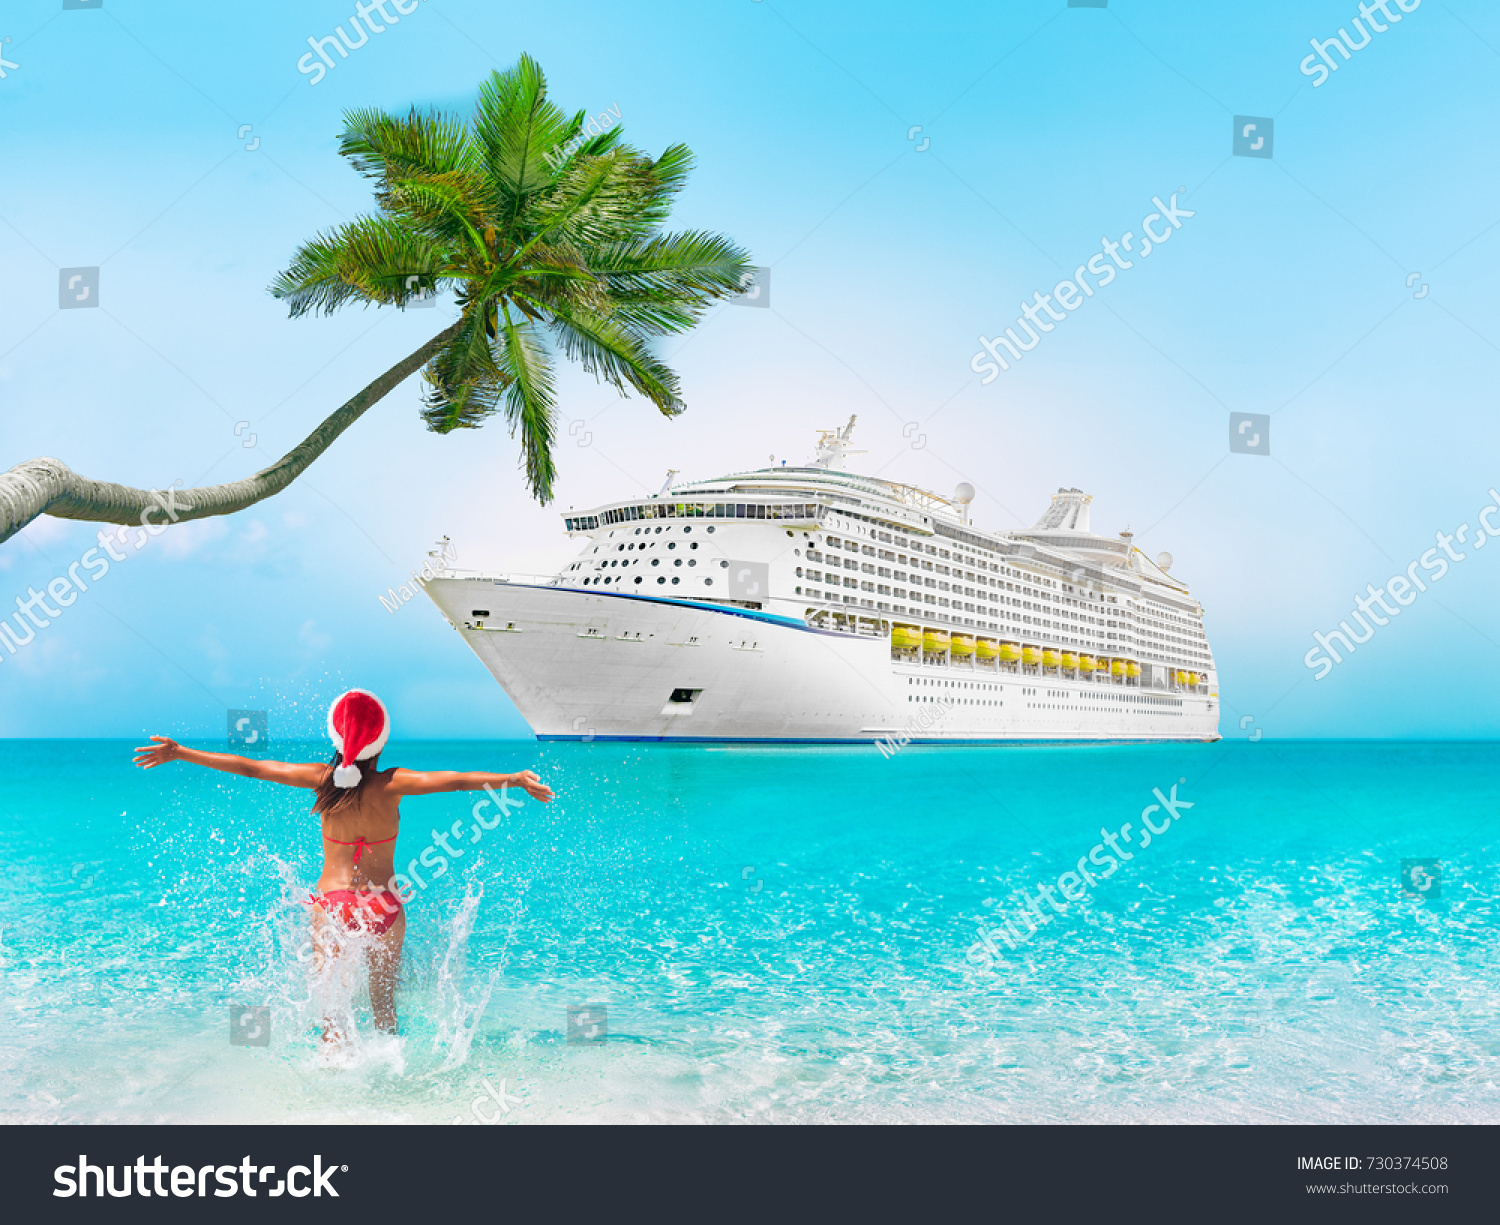 Christmas cruise travel vacation woman swimming at Caribbean beach with ship and palm tree in background